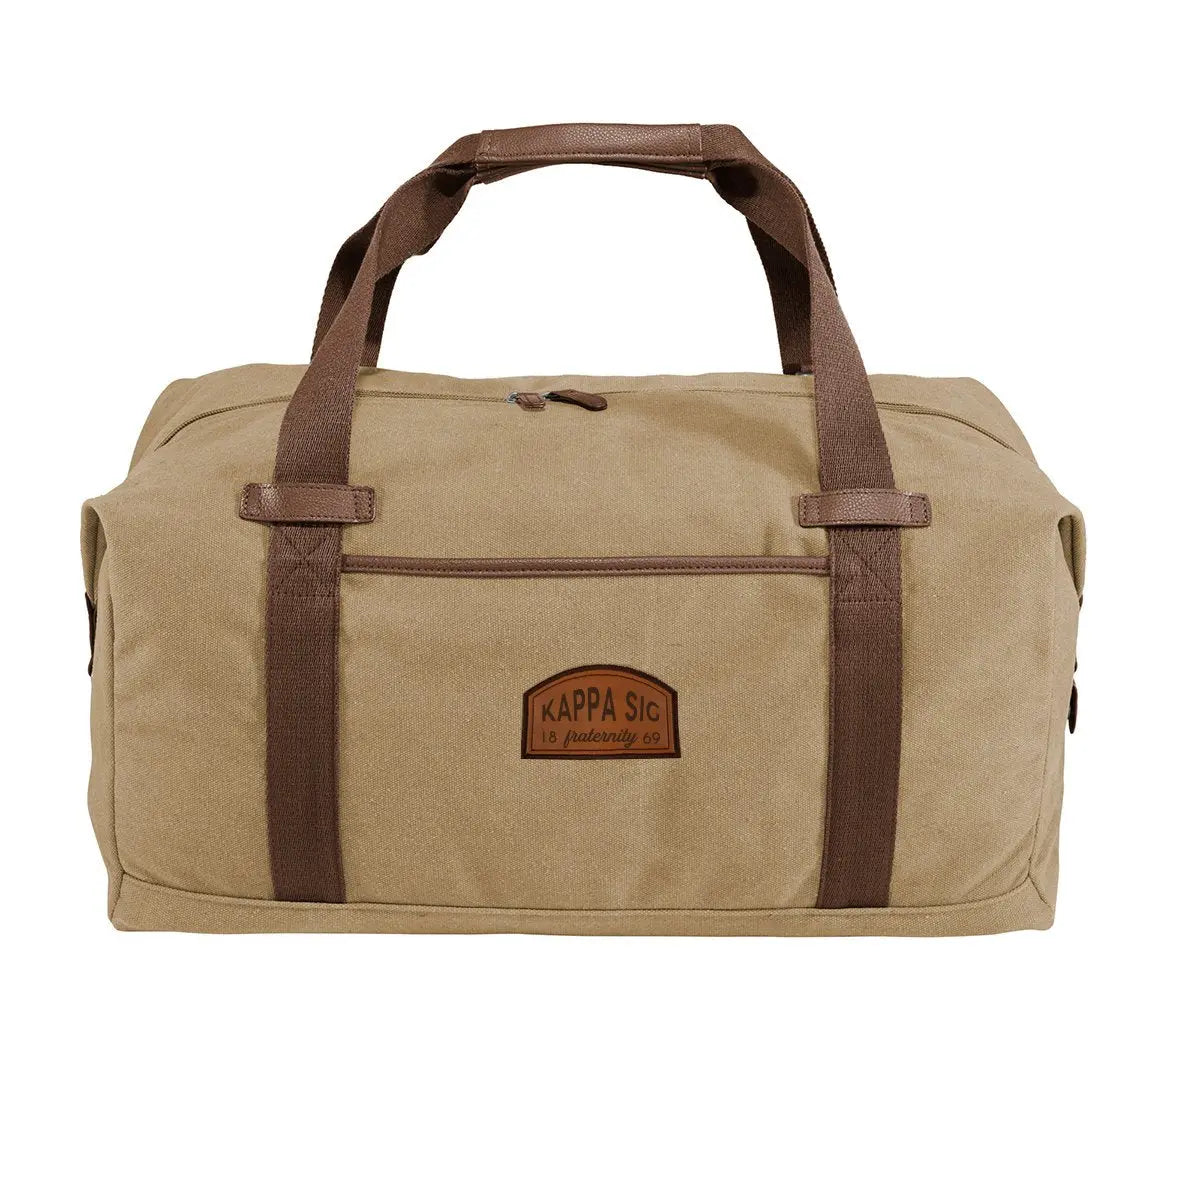 Kappa Sig Khaki Canvas Duffel With Leather Patch - Kappa Sigma Official Store